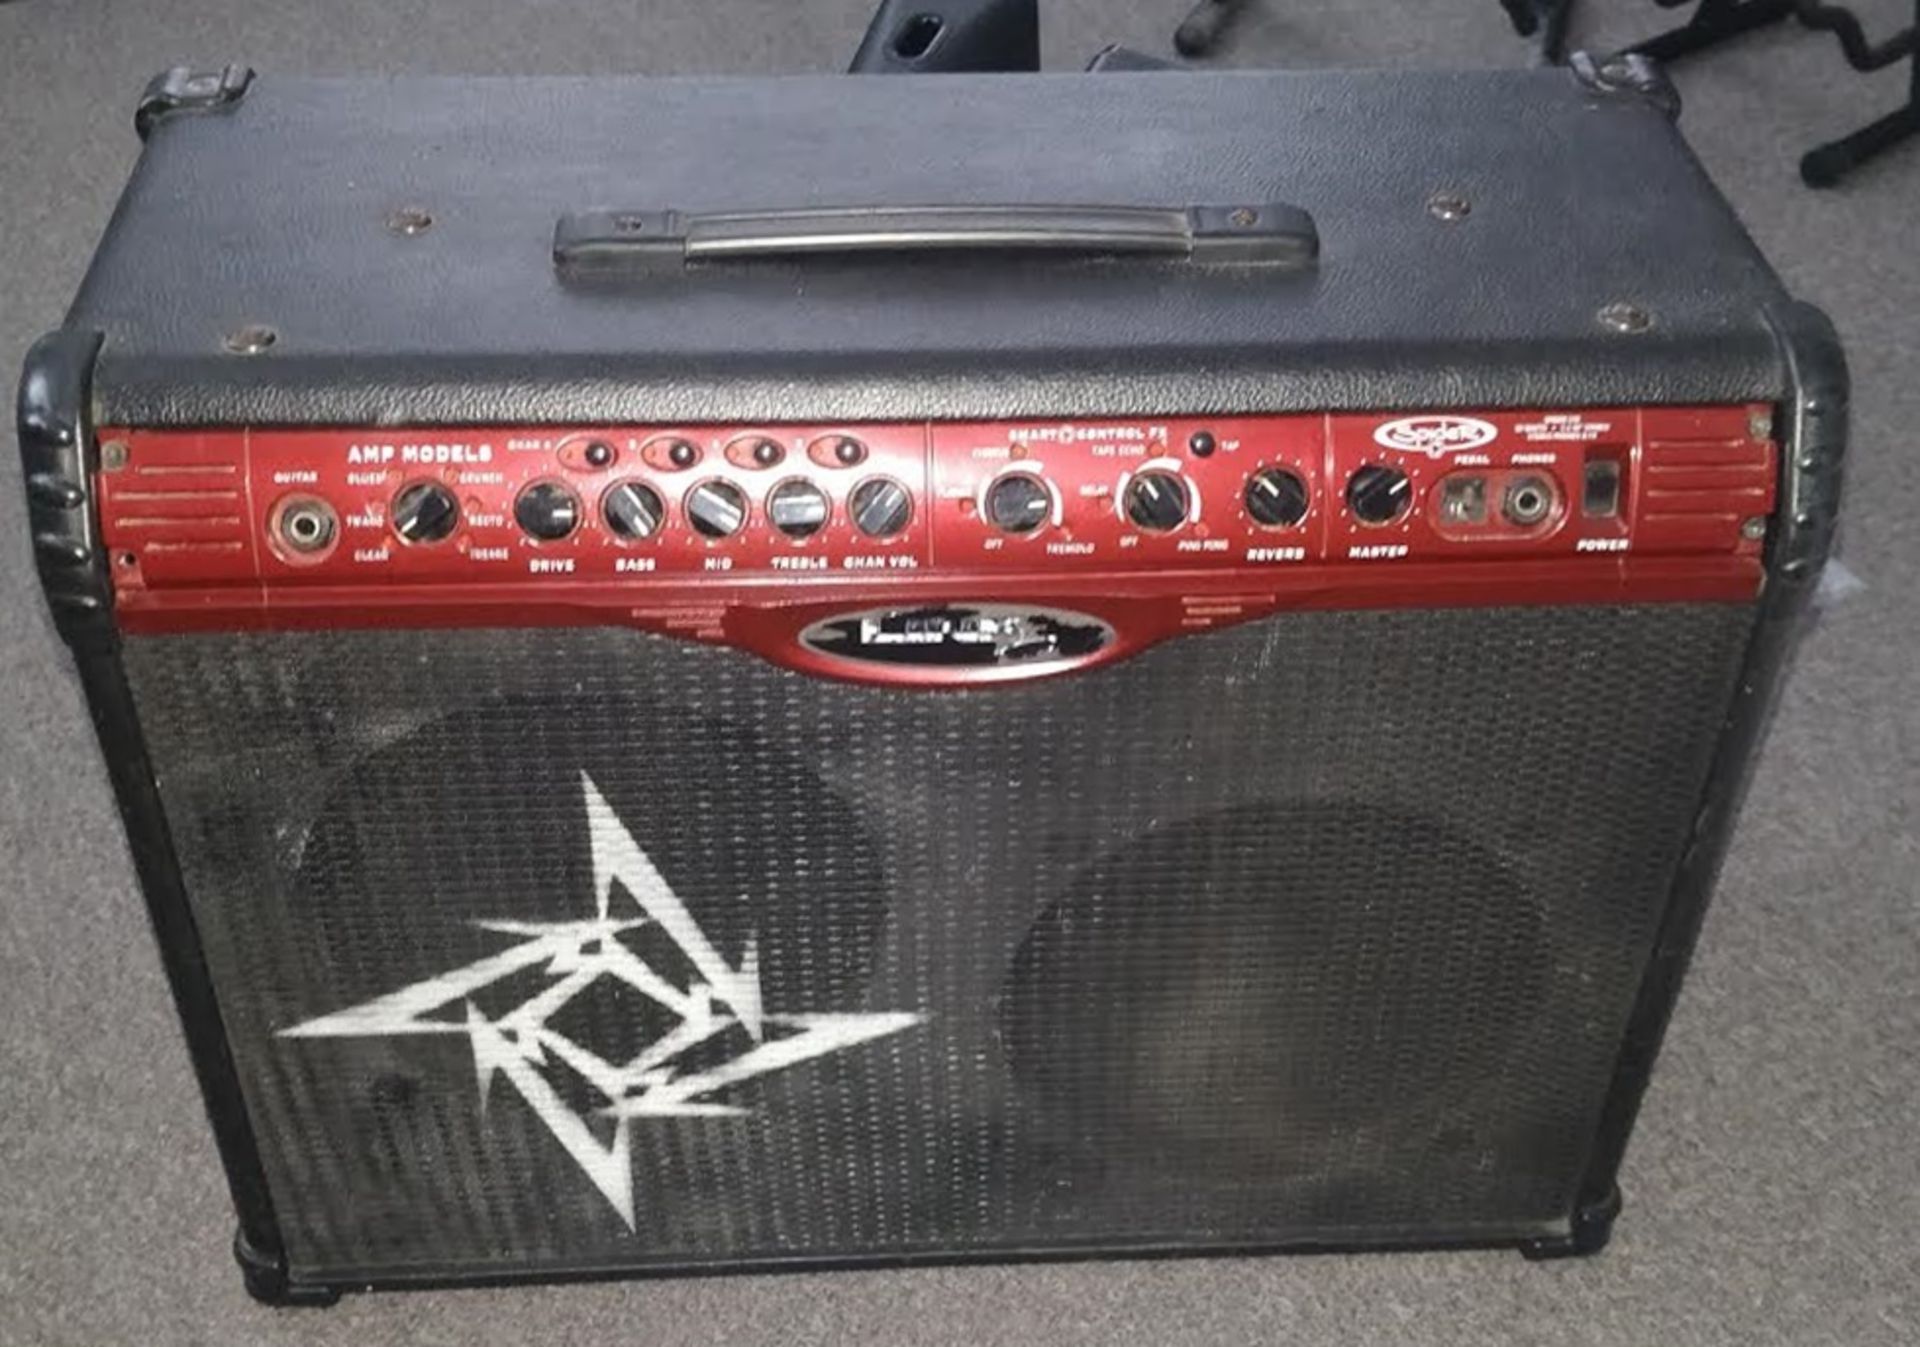 1 x Guitar Amplifier With Amp Modelling - Line 6 Spider With Celestion Speakers -Includes Cables -